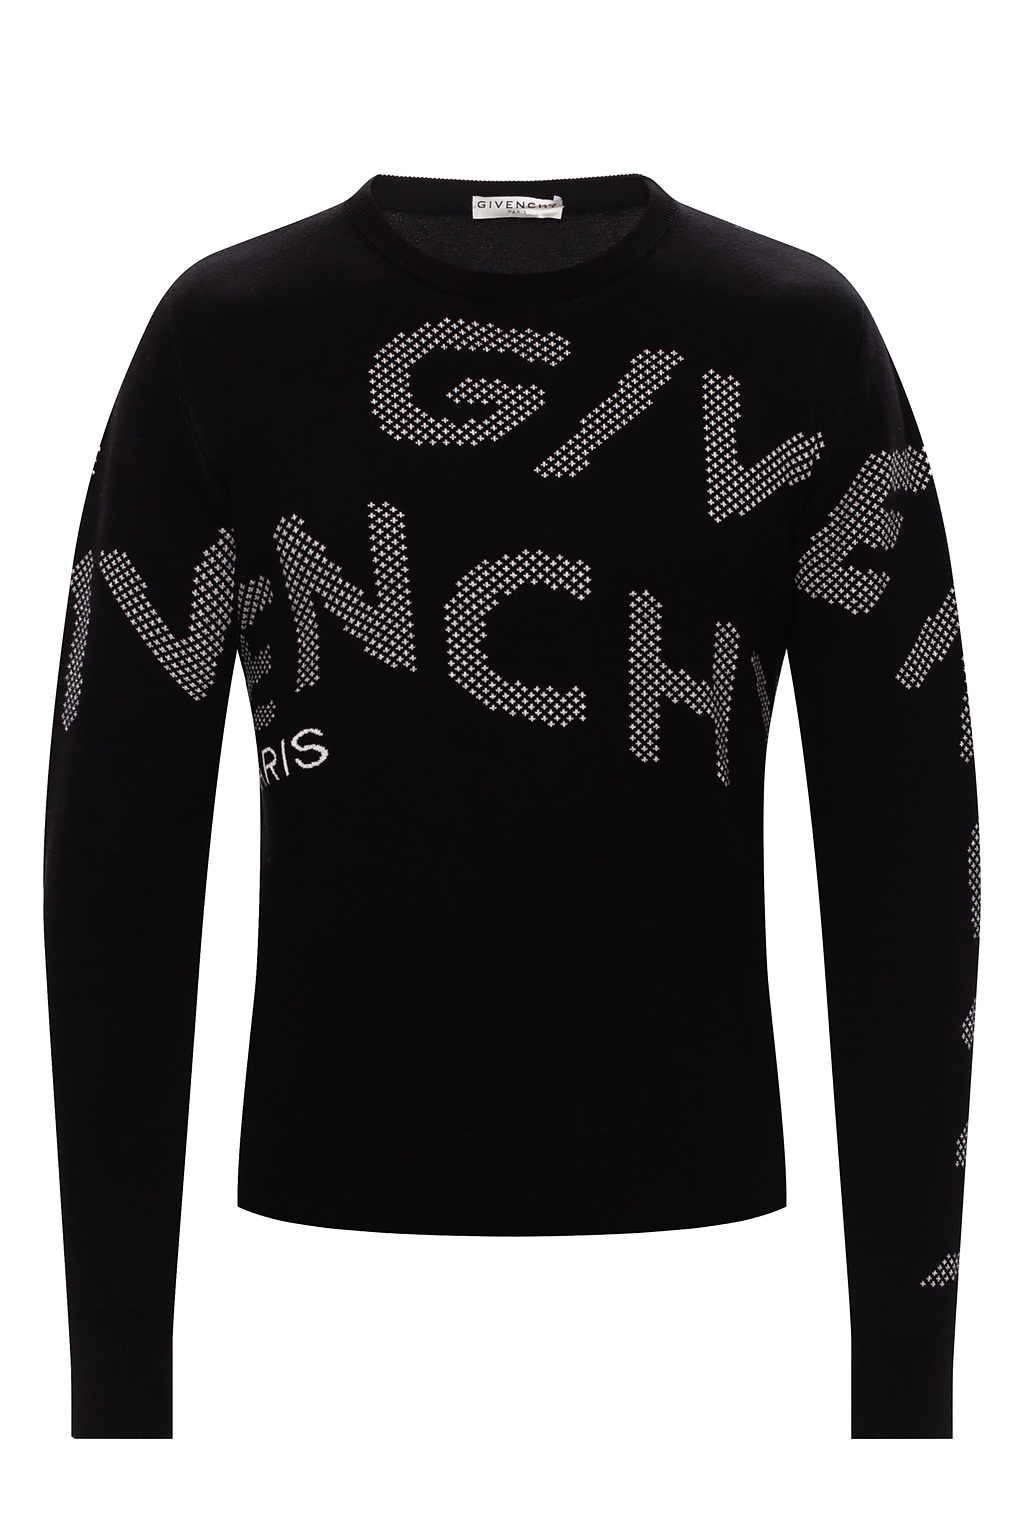 Sweater with logo Givenchy - Givenchy 4G cashmere zip hoodie -  GenesinlifeShops GB